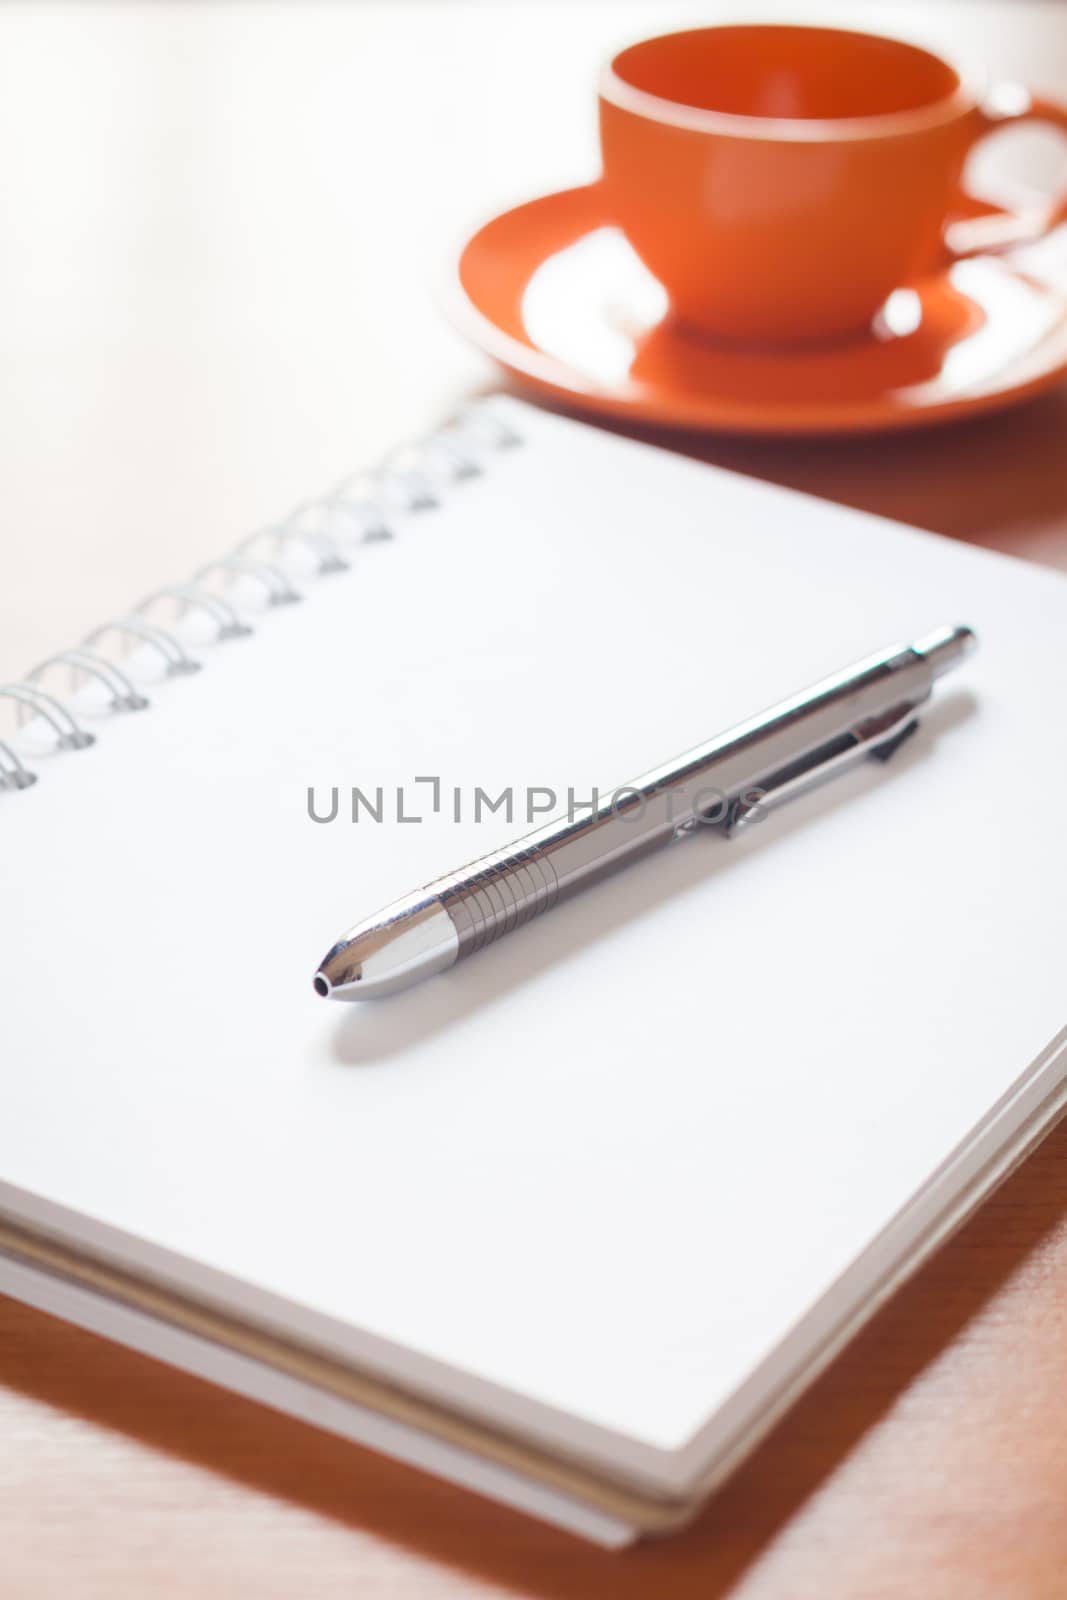 Pen on open blank white notebook with coffee cup on the desk, stock photo